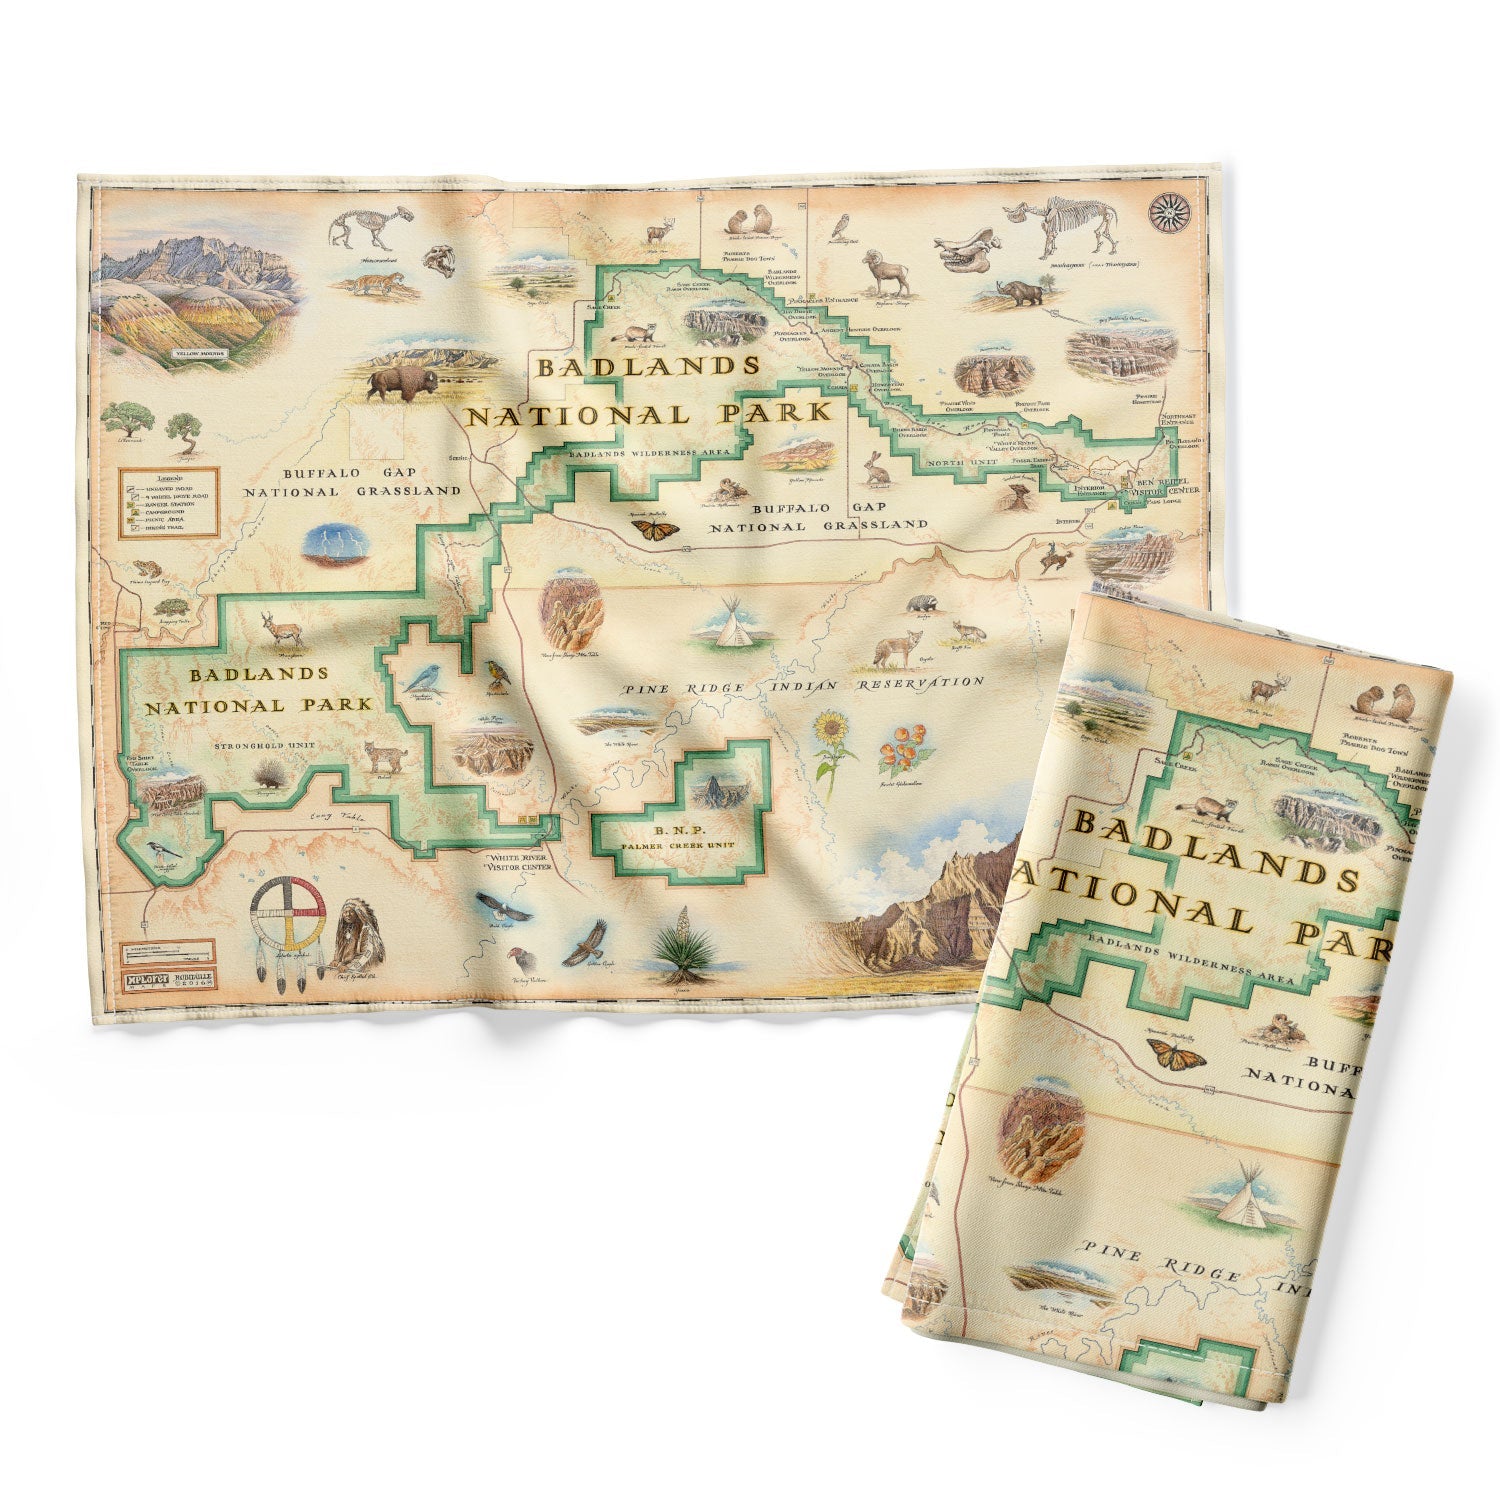 Badlands National Park Map kitchen dishtowel in earth-tone colors. It features Buffalo Gap Grasslands, Vulture Peak, and Yellow Mounds Overlook. Flora and fauna of Jasper Tree, Yucca plant, deer, dinosaurs, birds, and fox.